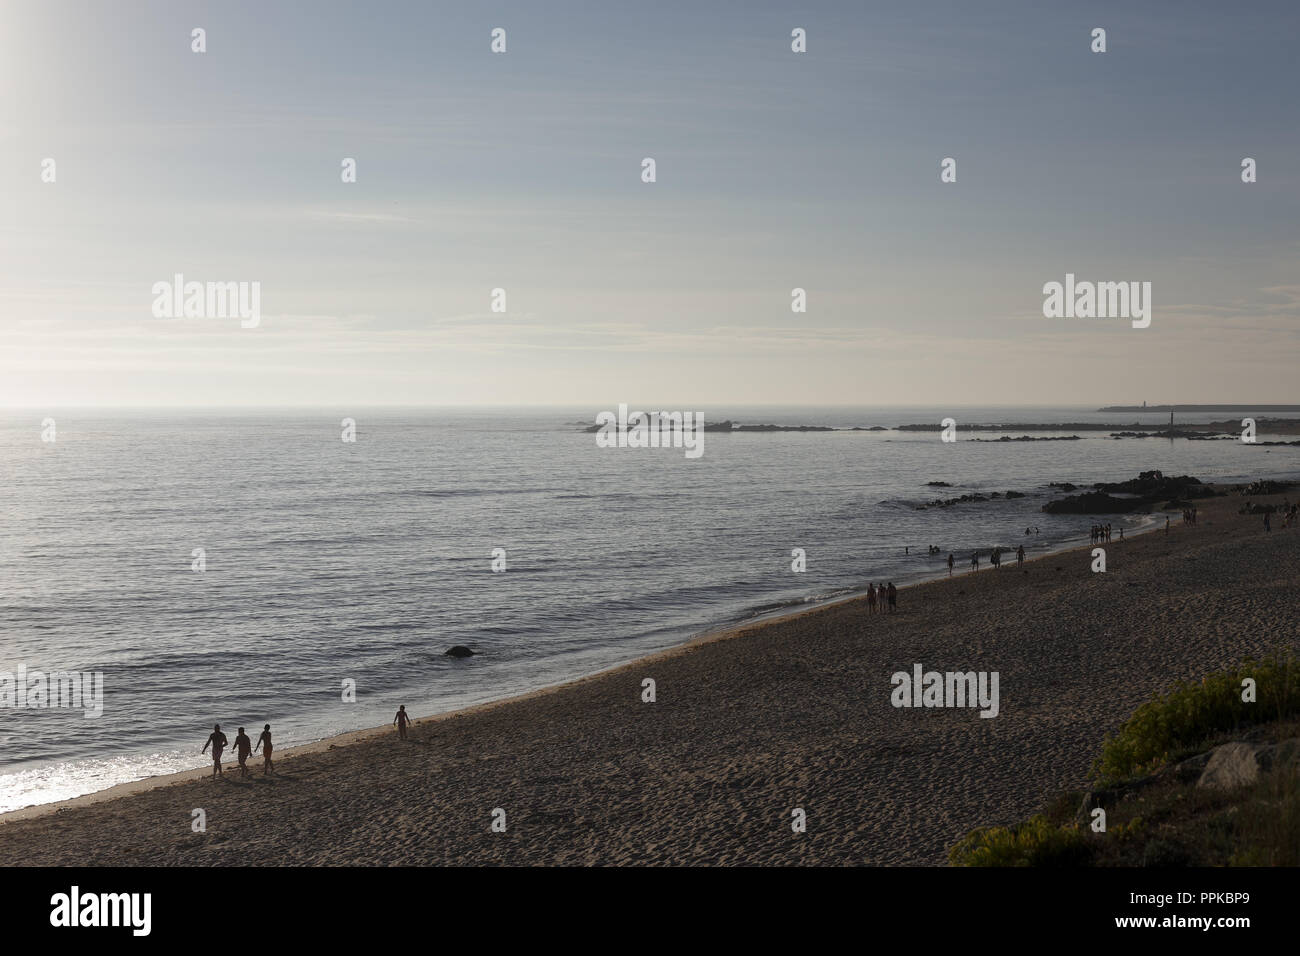 Vila do Conde, Portugal - August 6, 2014:  People walking on the beach at sunset Stock Photo